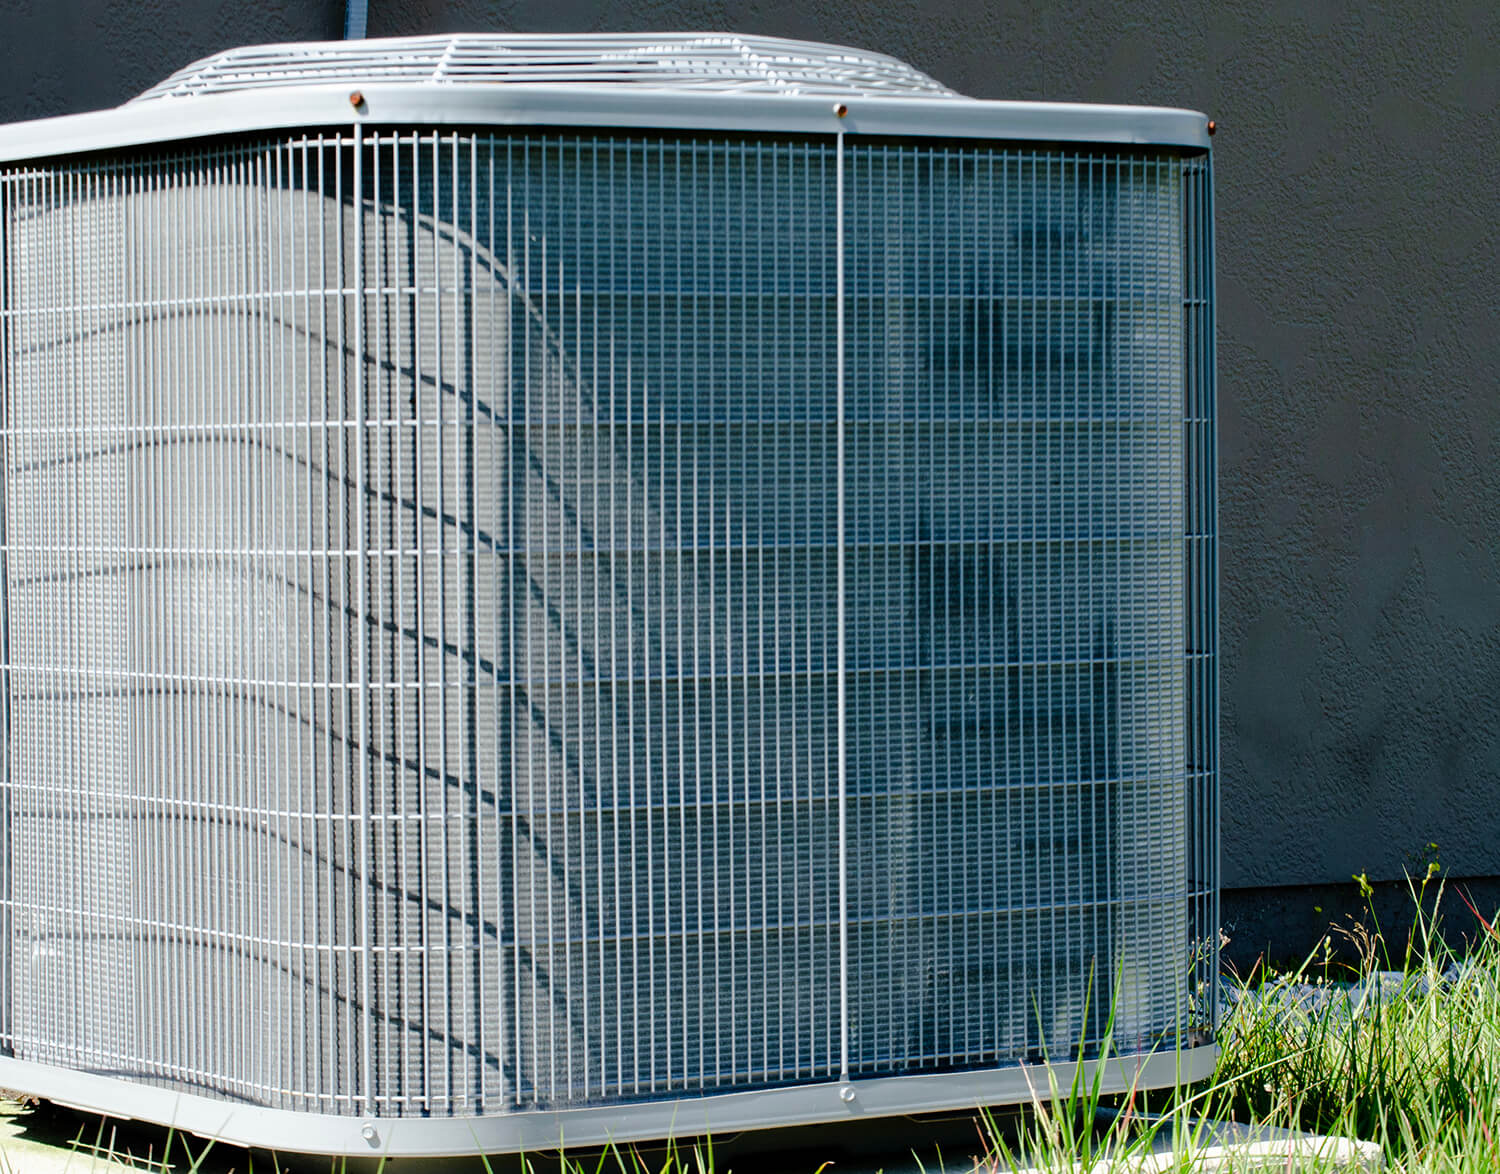 It may seem easy to choose an HVAC unit until you make an expensive mistake